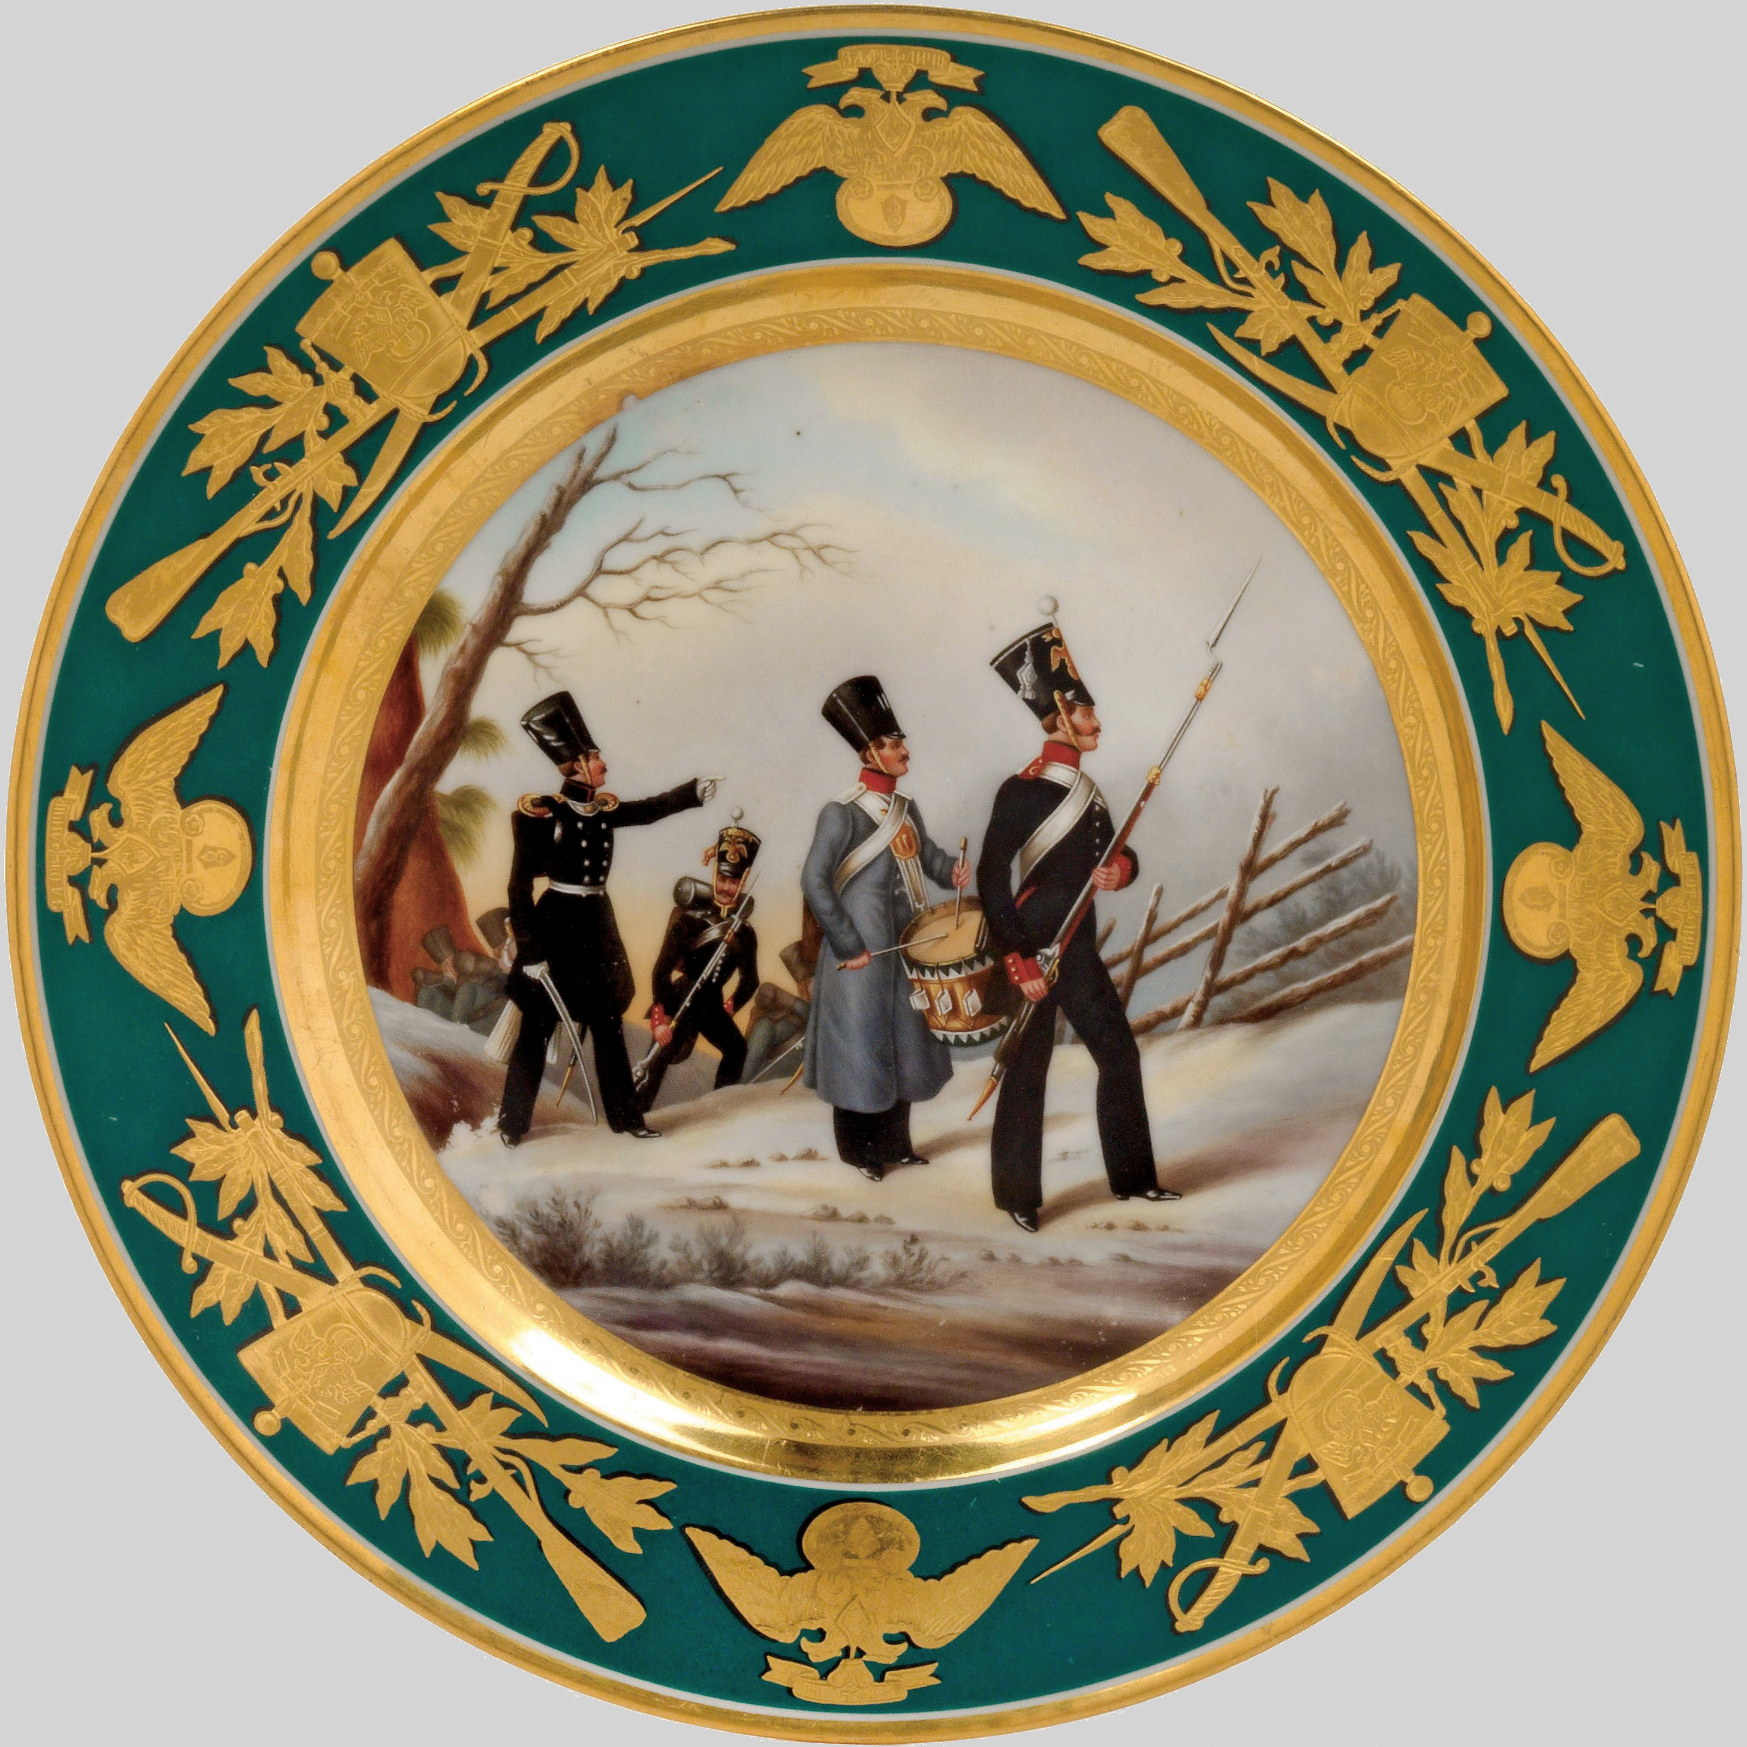 Russian Imperial Porcelain Factory military plate with turquoise border depicting infantry soldiers and officers